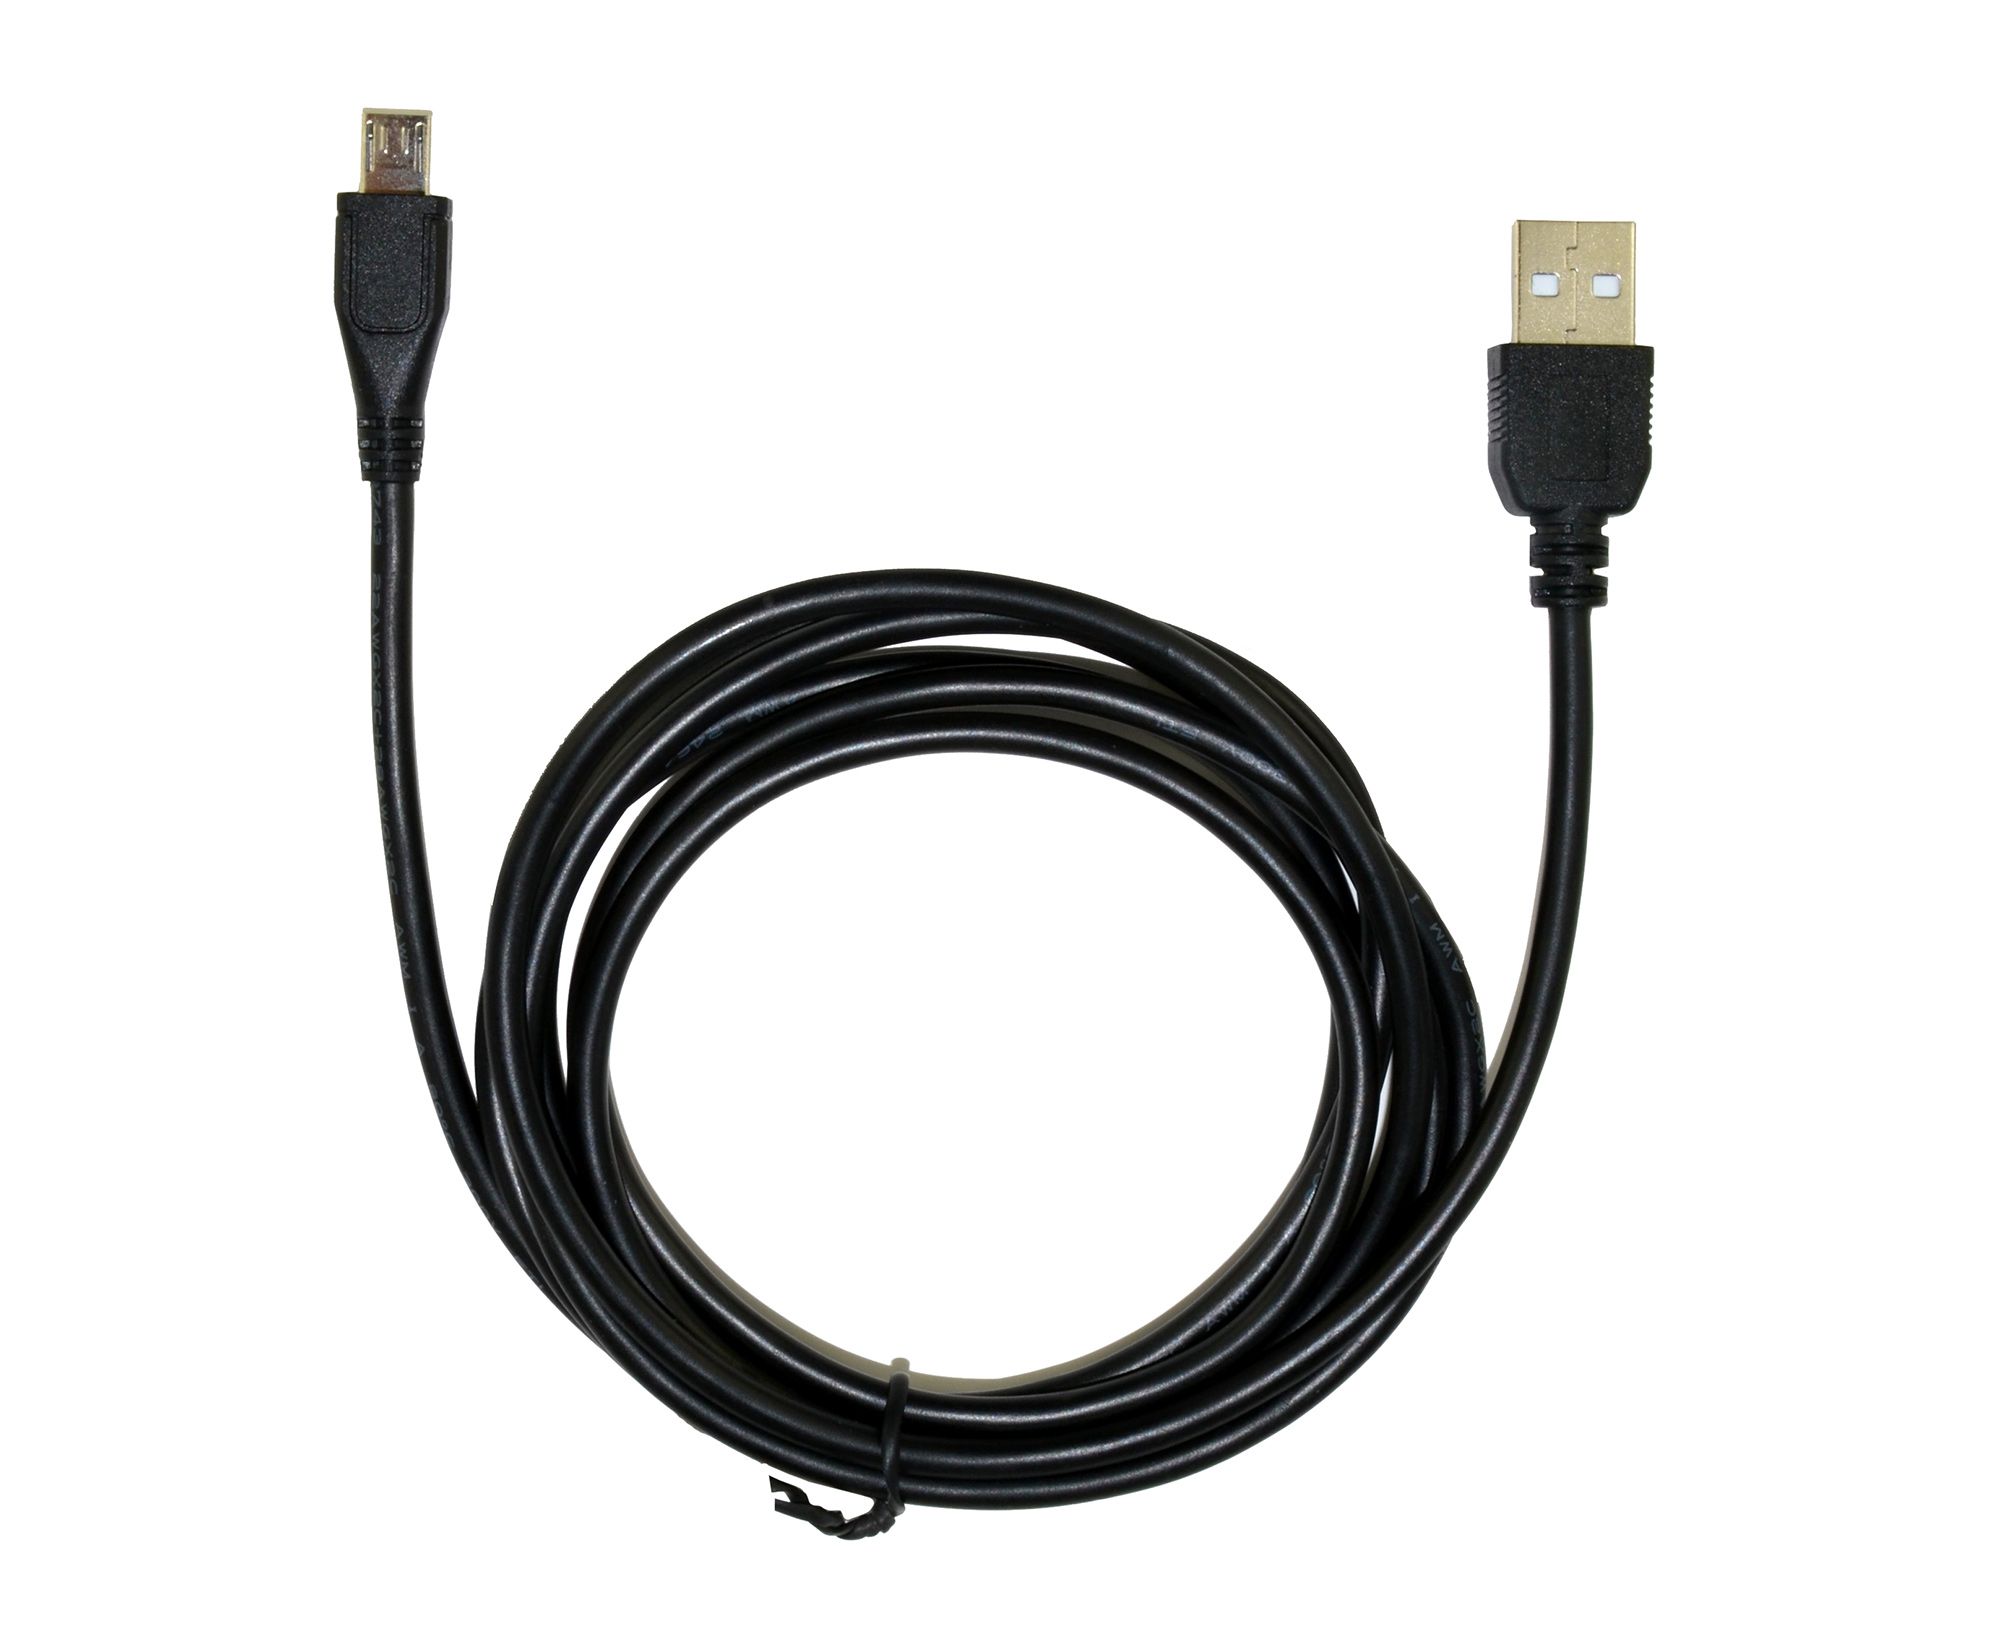 3 Foot USB 2.0 Type A Male to Micro USB Male Cable